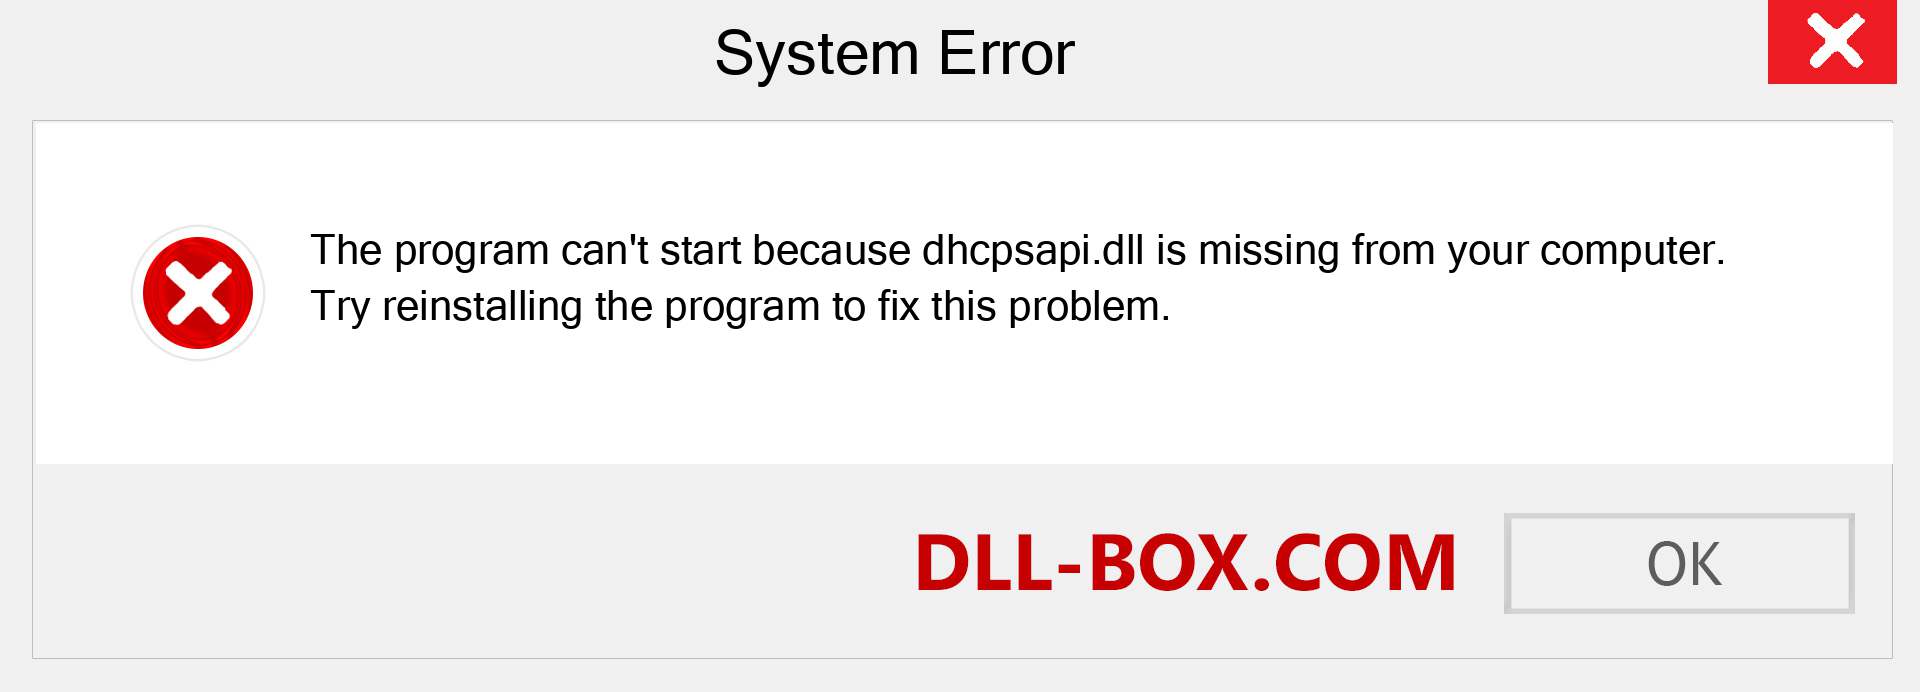  dhcpsapi.dll file is missing?. Download for Windows 7, 8, 10 - Fix  dhcpsapi dll Missing Error on Windows, photos, images